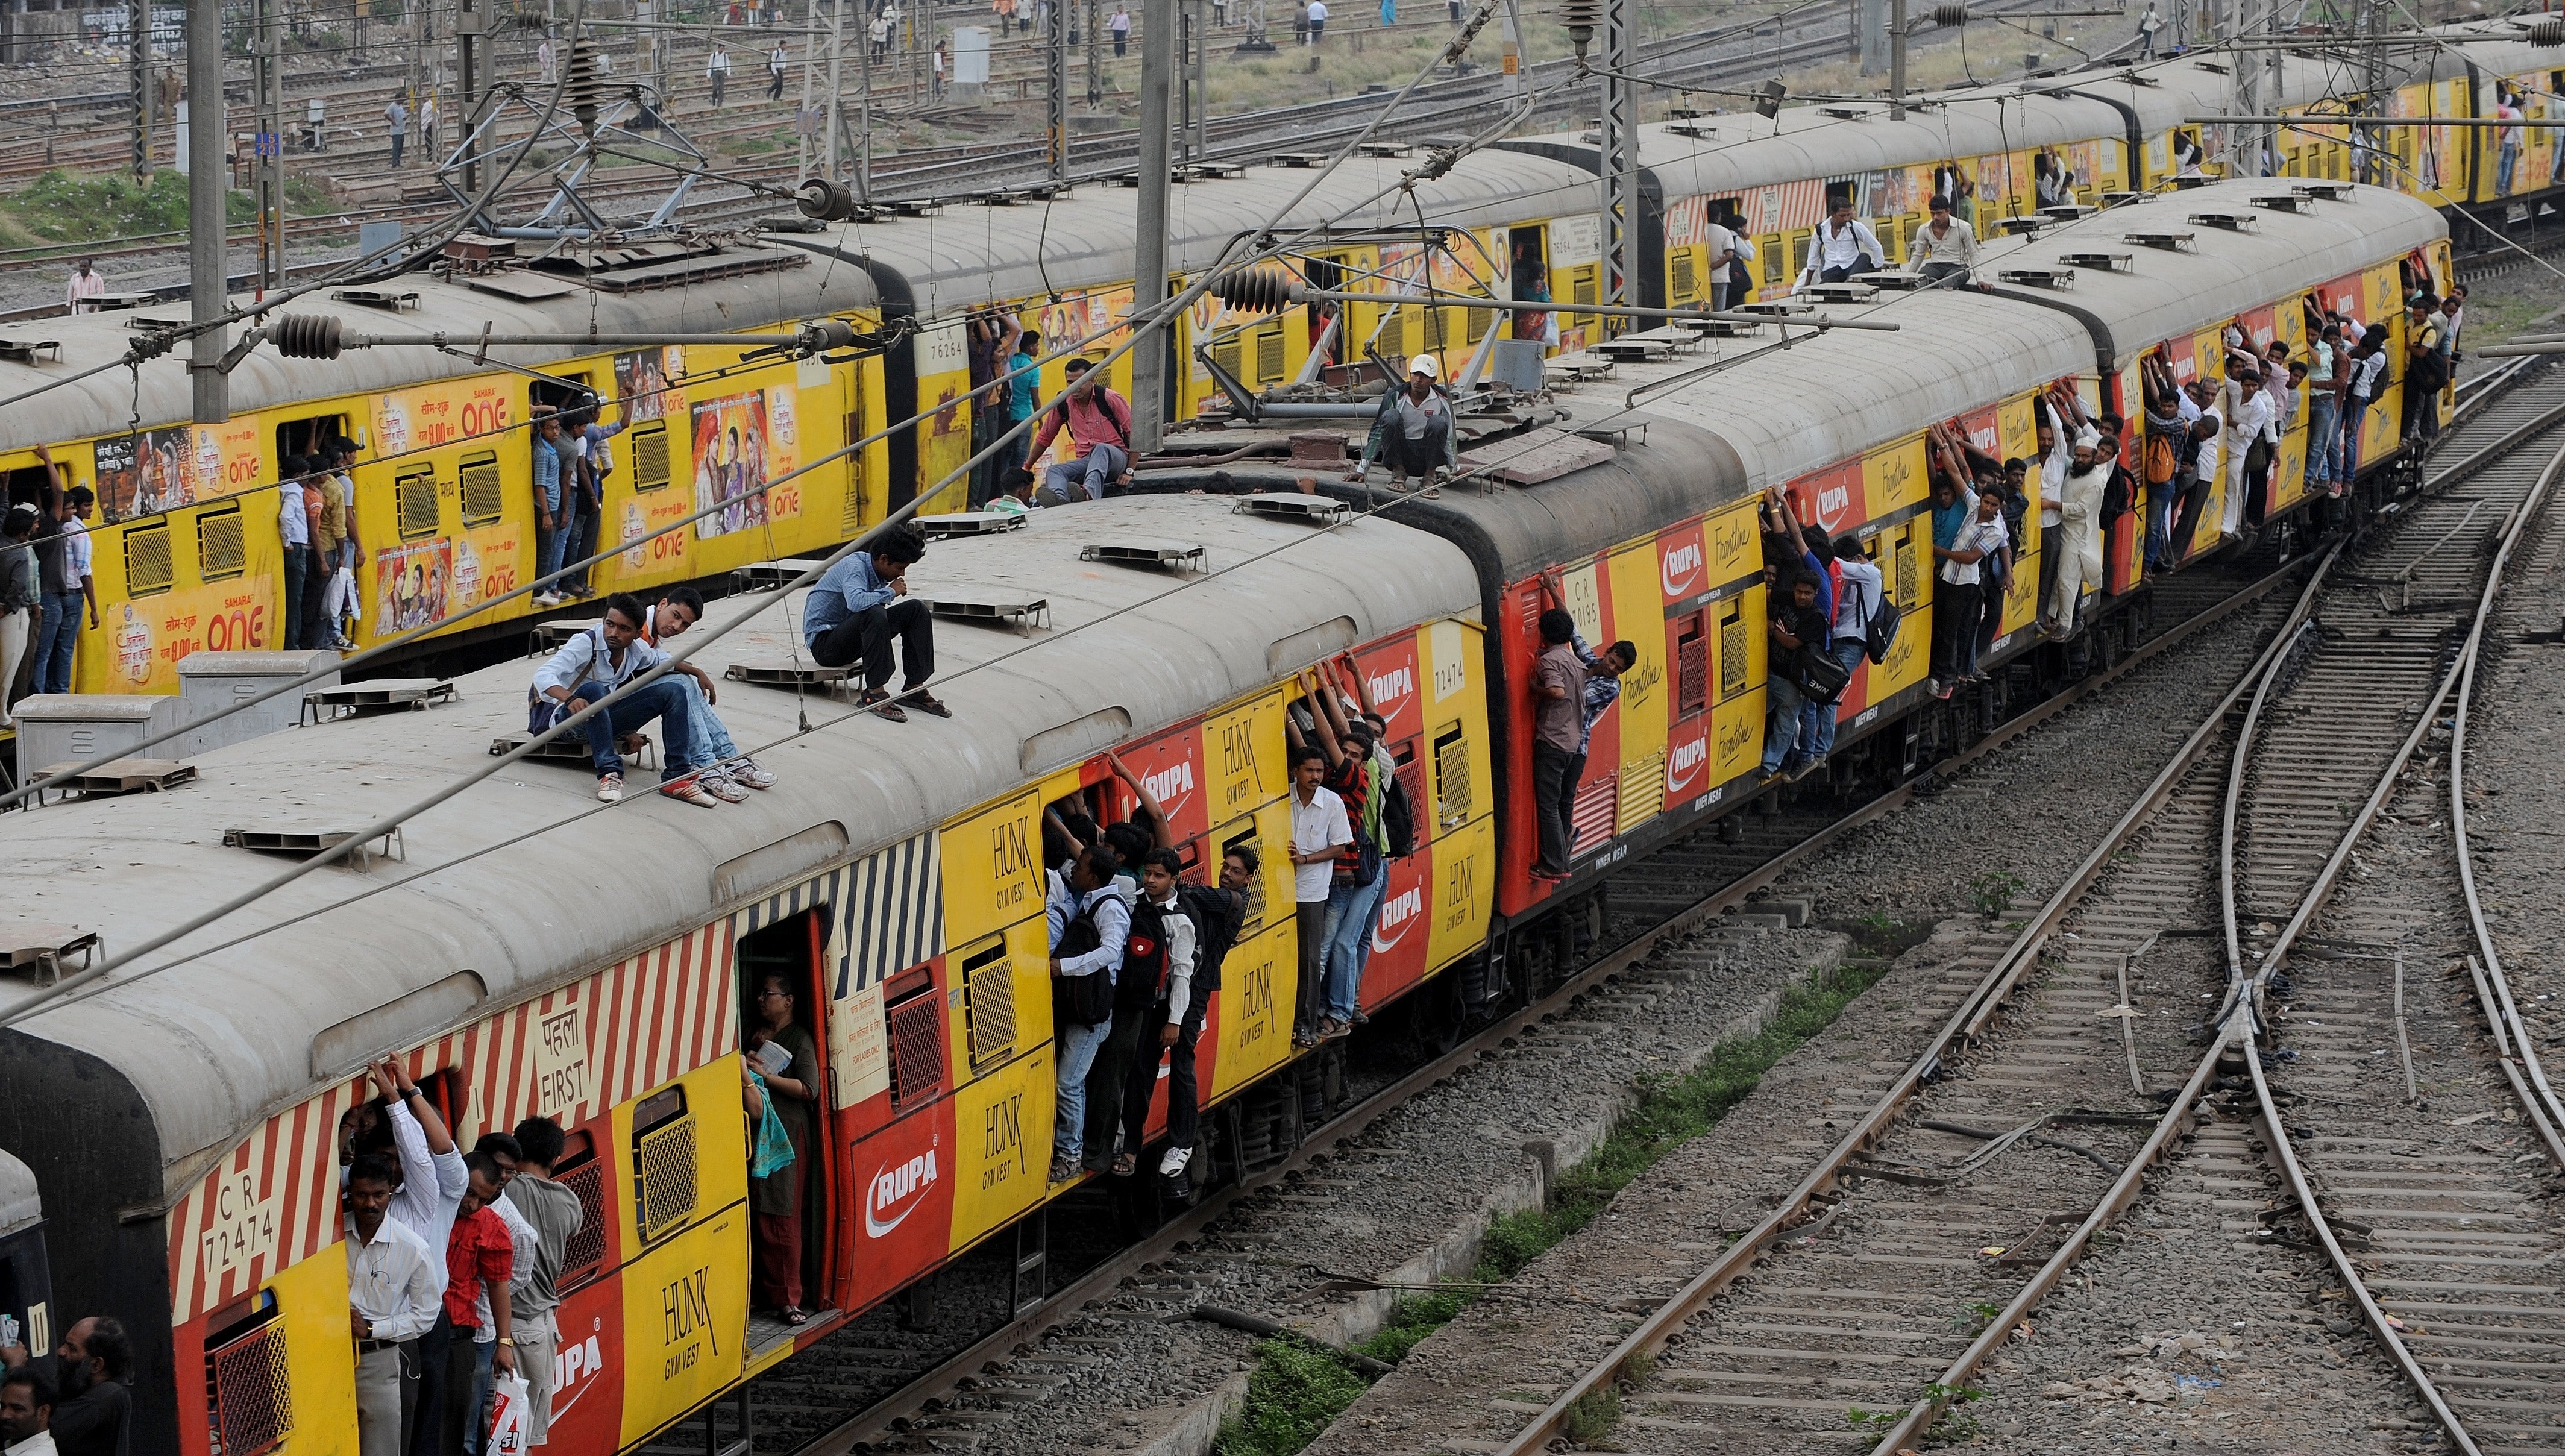 Passengers walked on track of Central Railway, traffic signals stopped working and stock exchange halted work after the huge power failure in Mumbai on 12 October, 2020